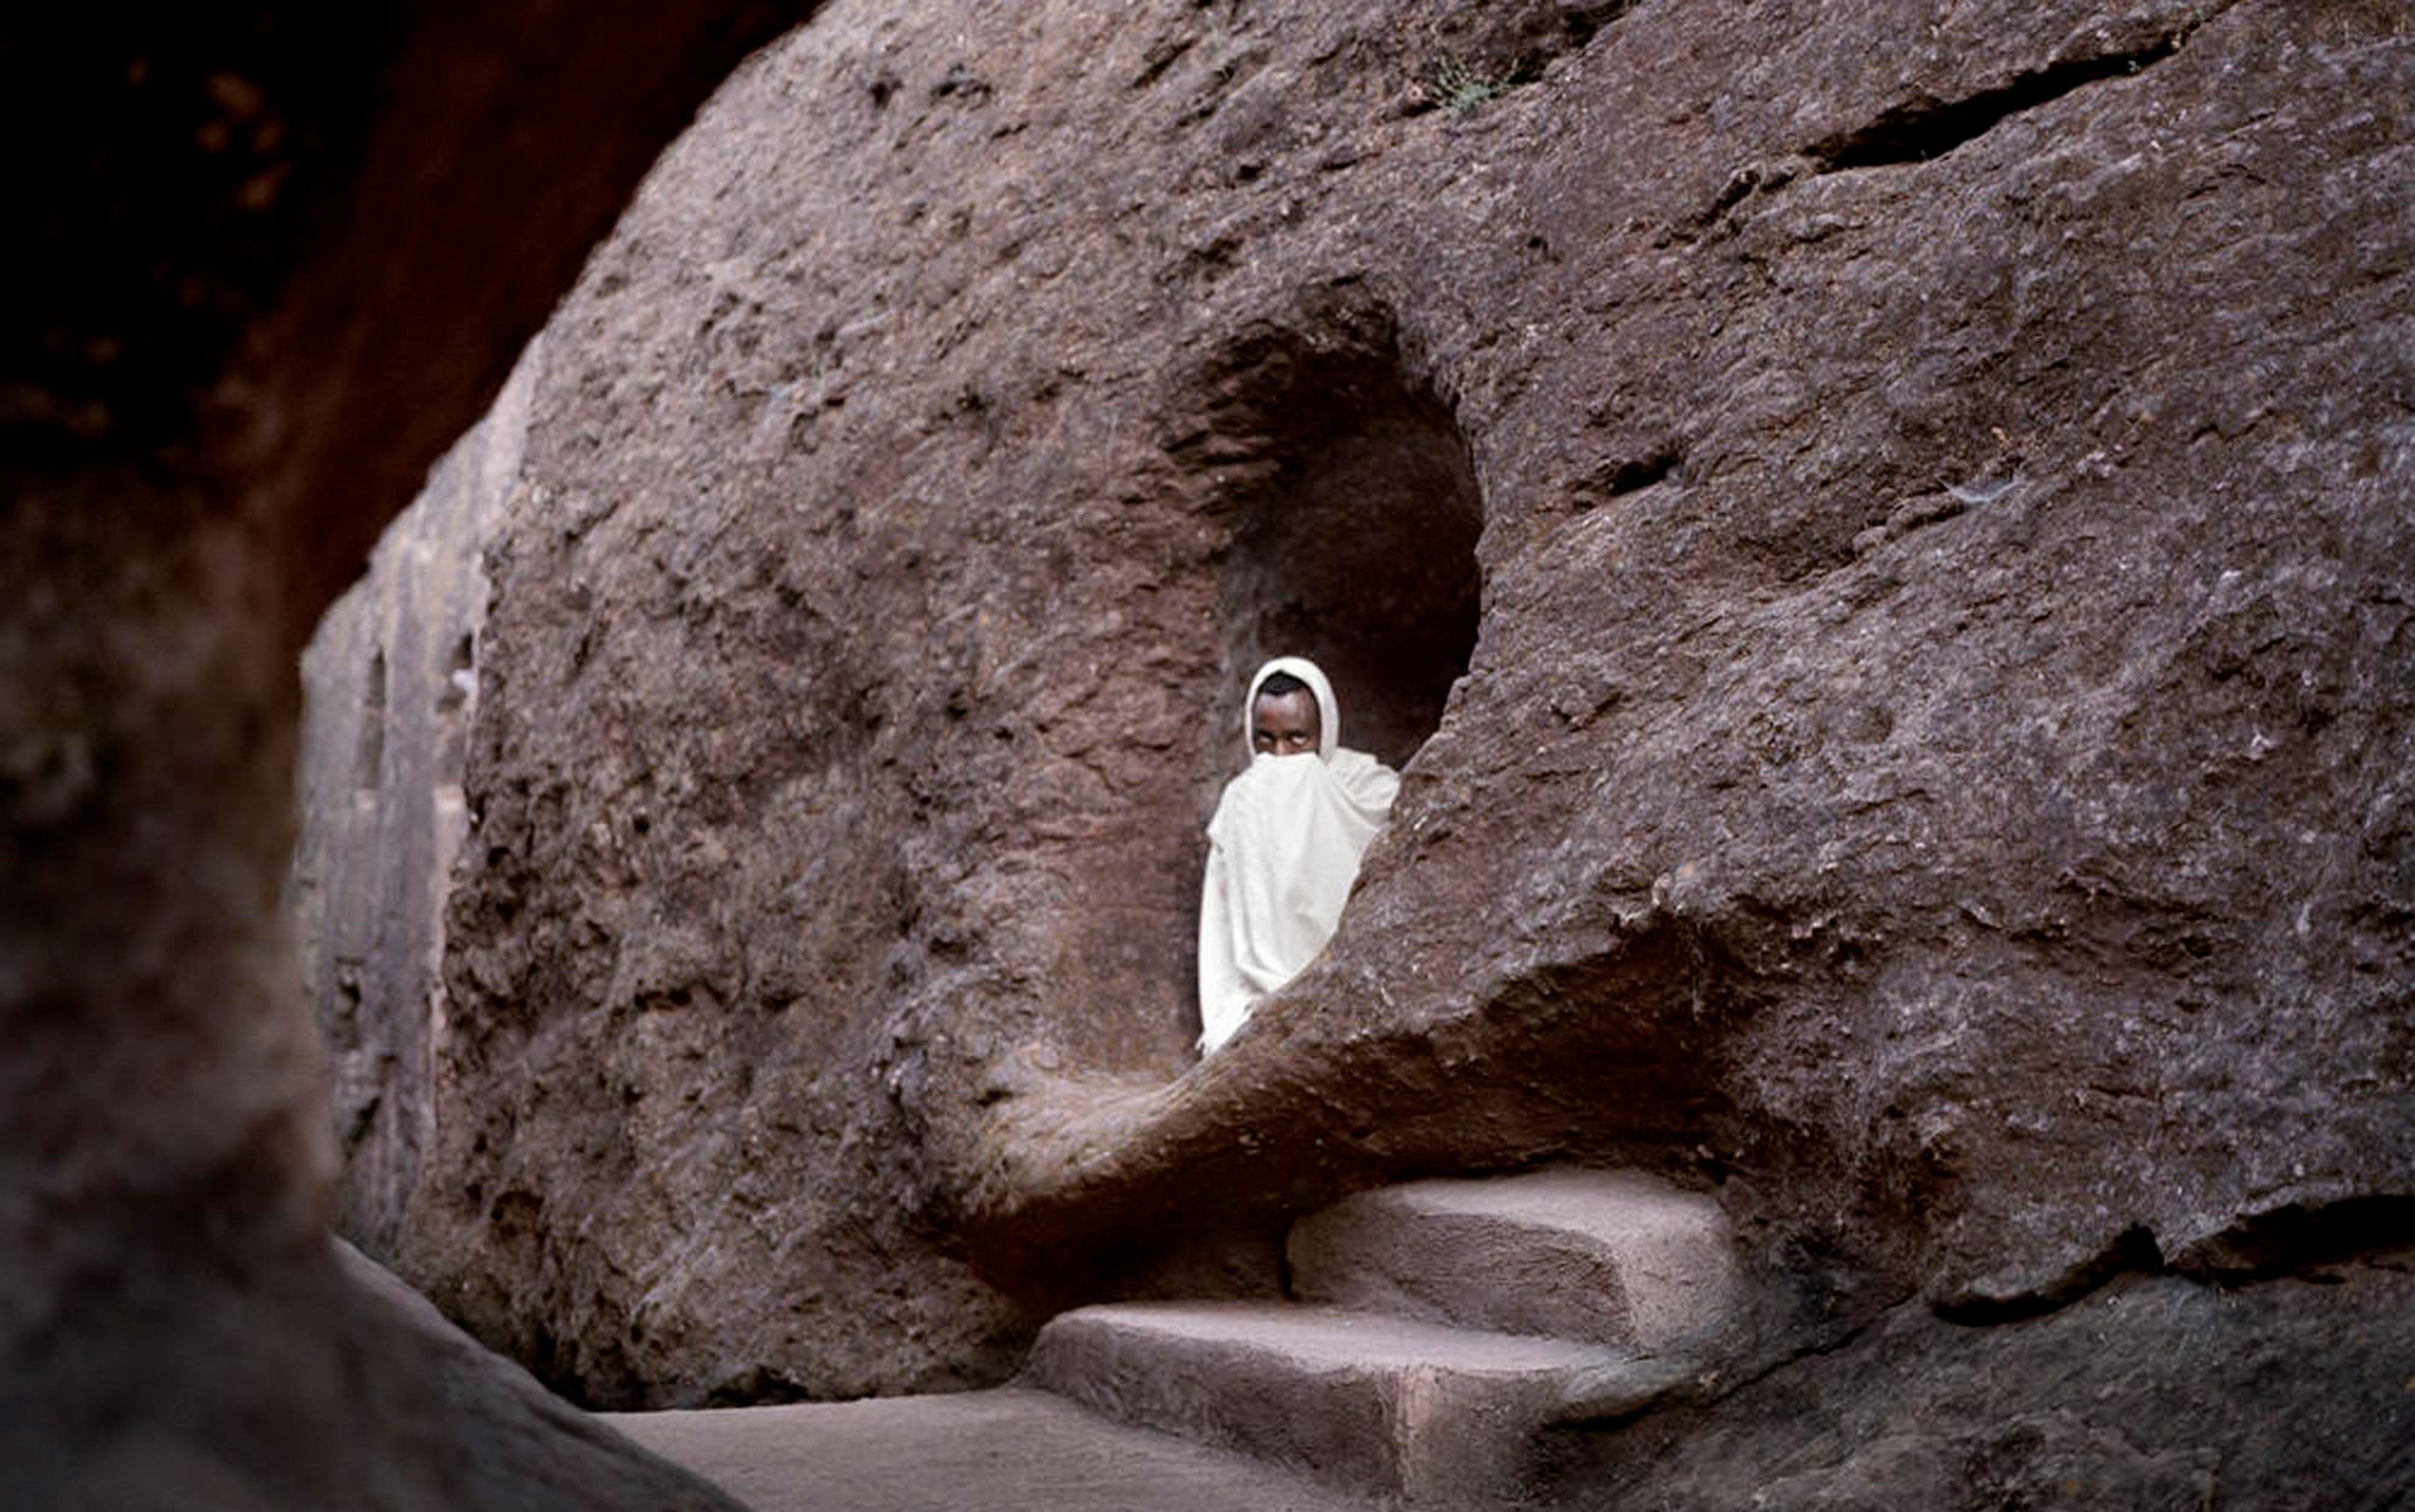 A man dressed in white robes with his face obscured is seen in a cave entrance carved from rock